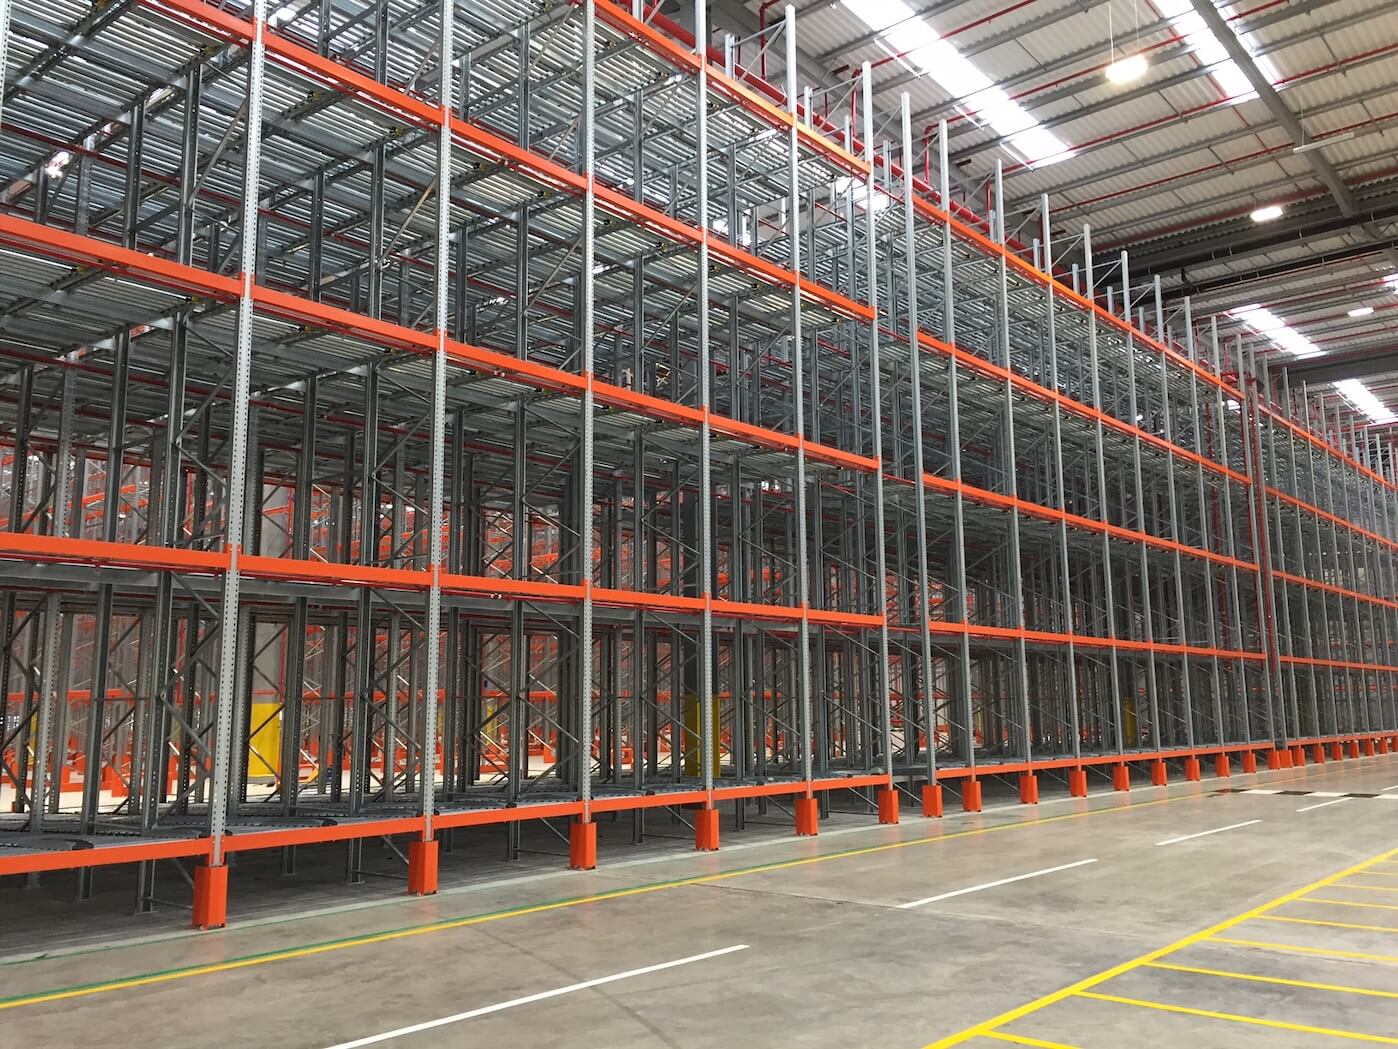 Things to Consider When Planning a Large Racking Project